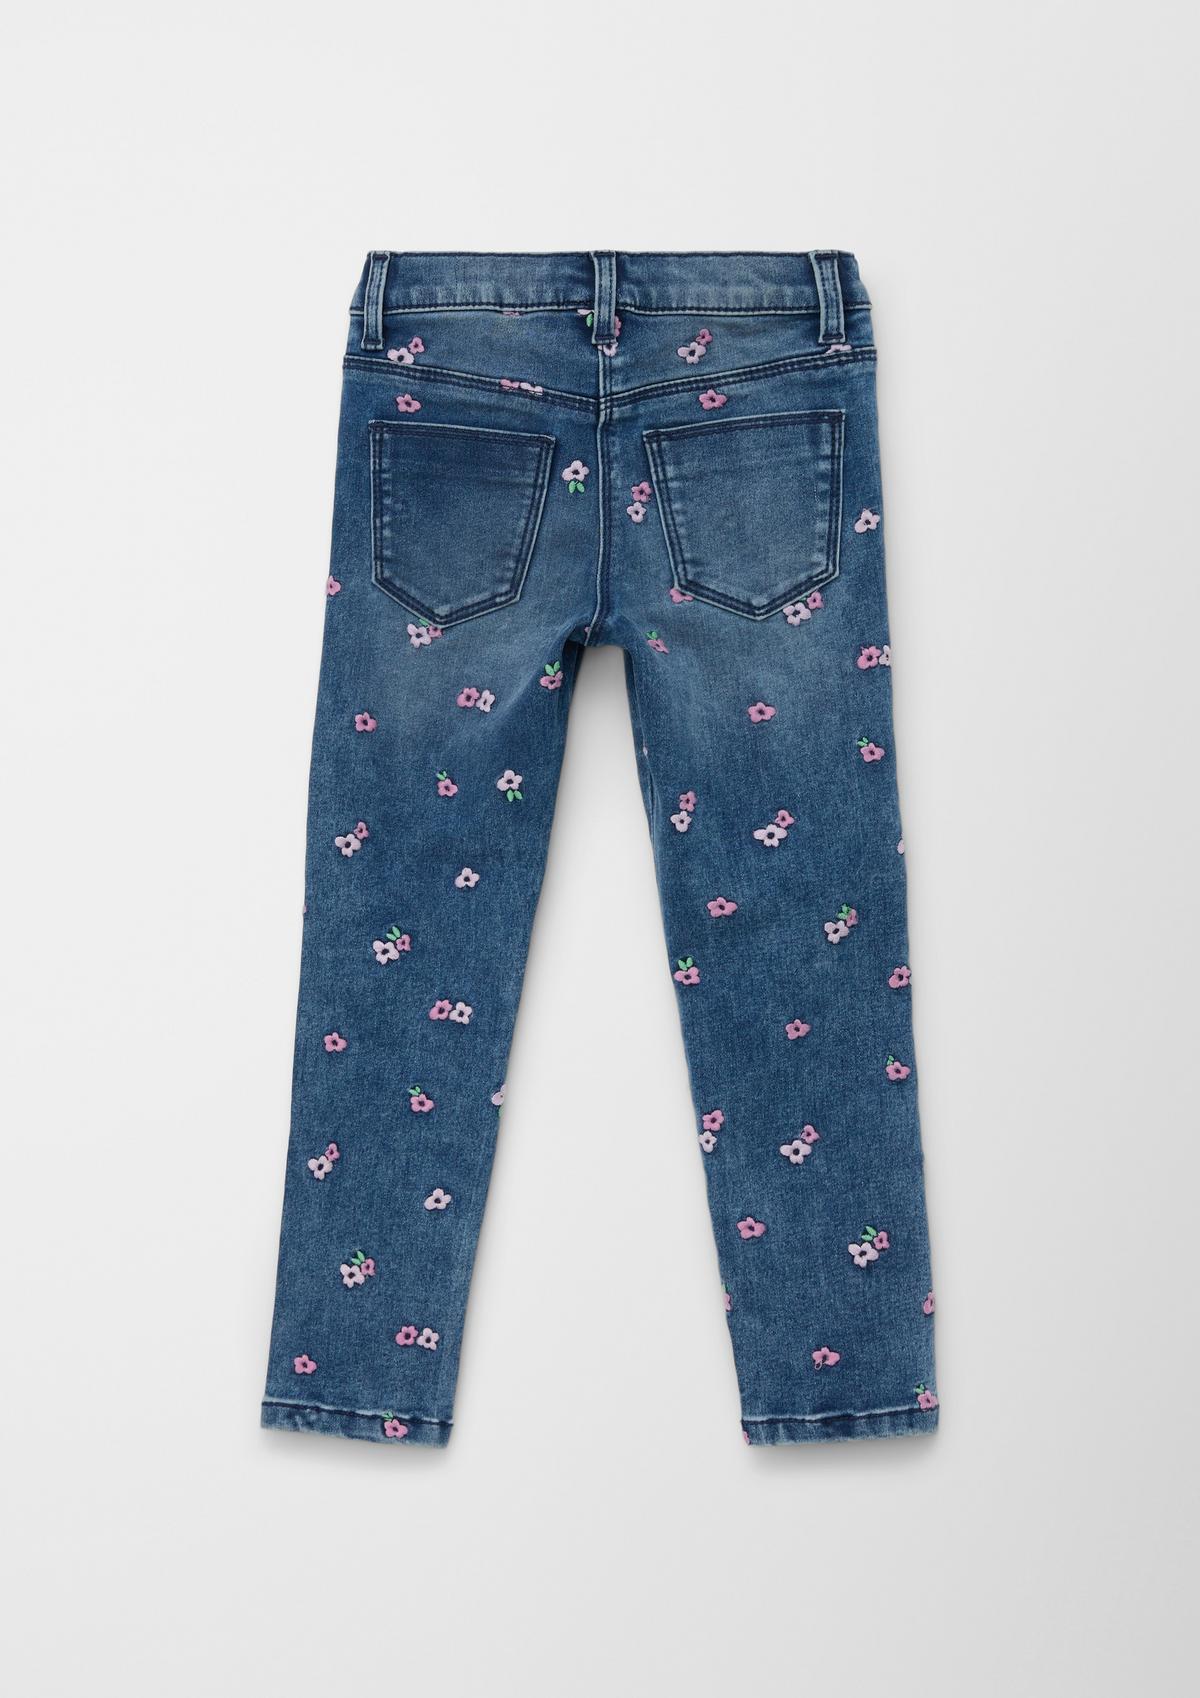 s.Oliver Jeans / slim fit / high rise / slim leg / floral embroidery